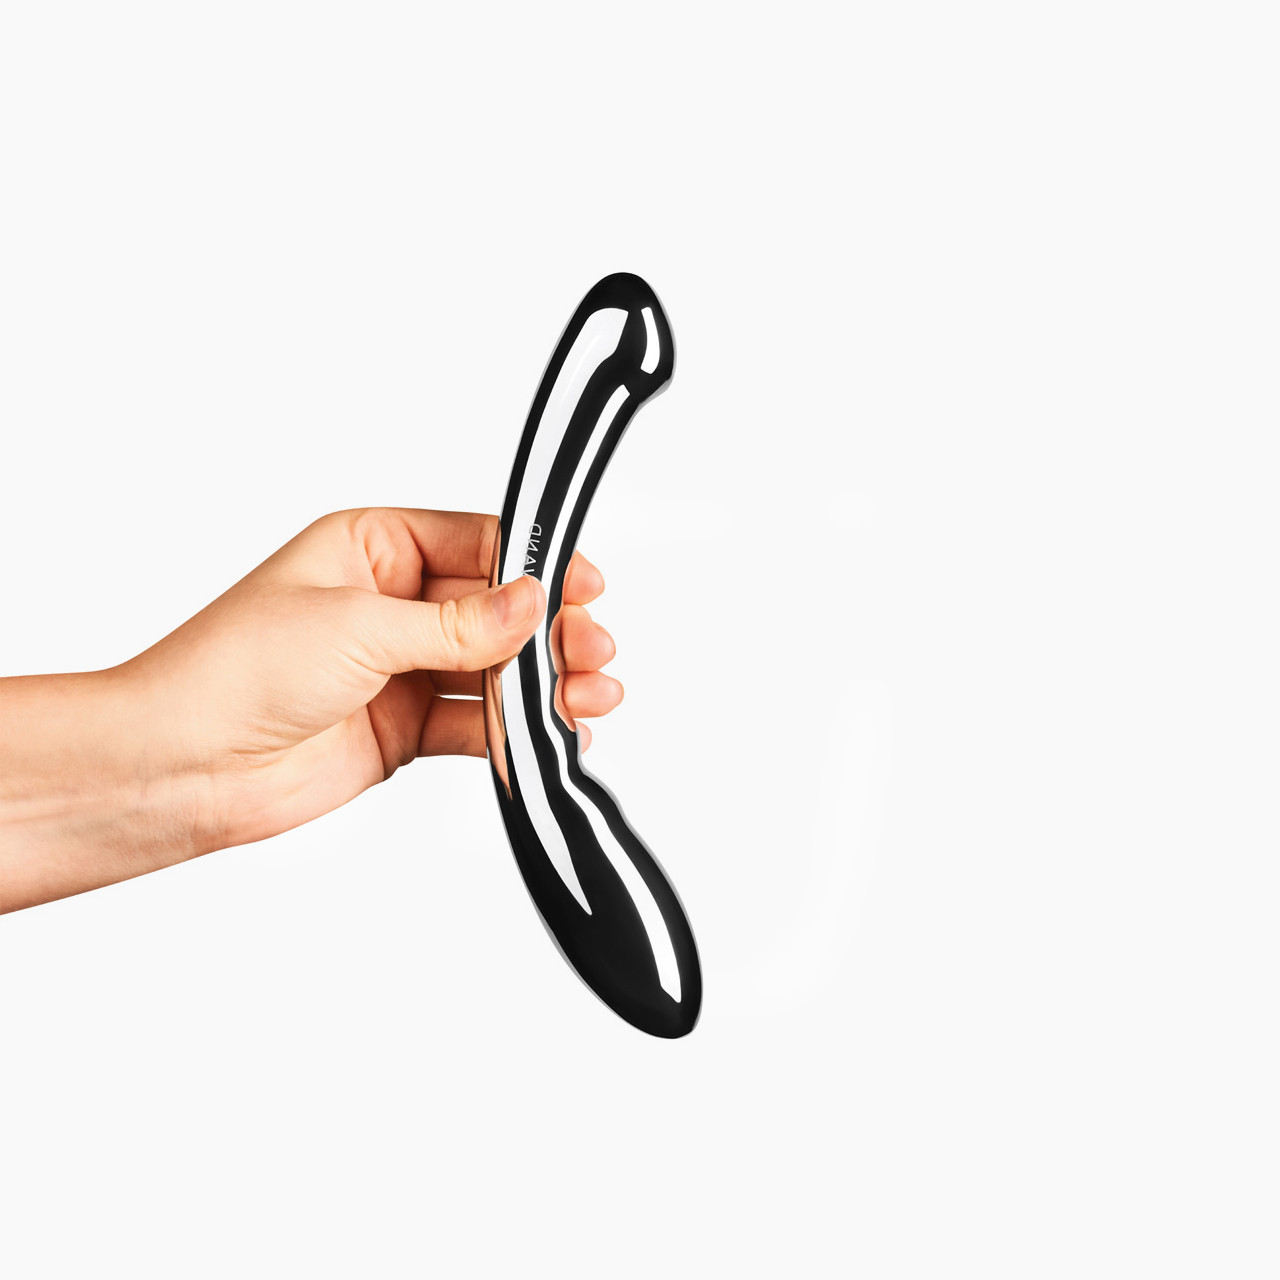 'Le Wand Arch', a curved personal massager held in a hand against a white background